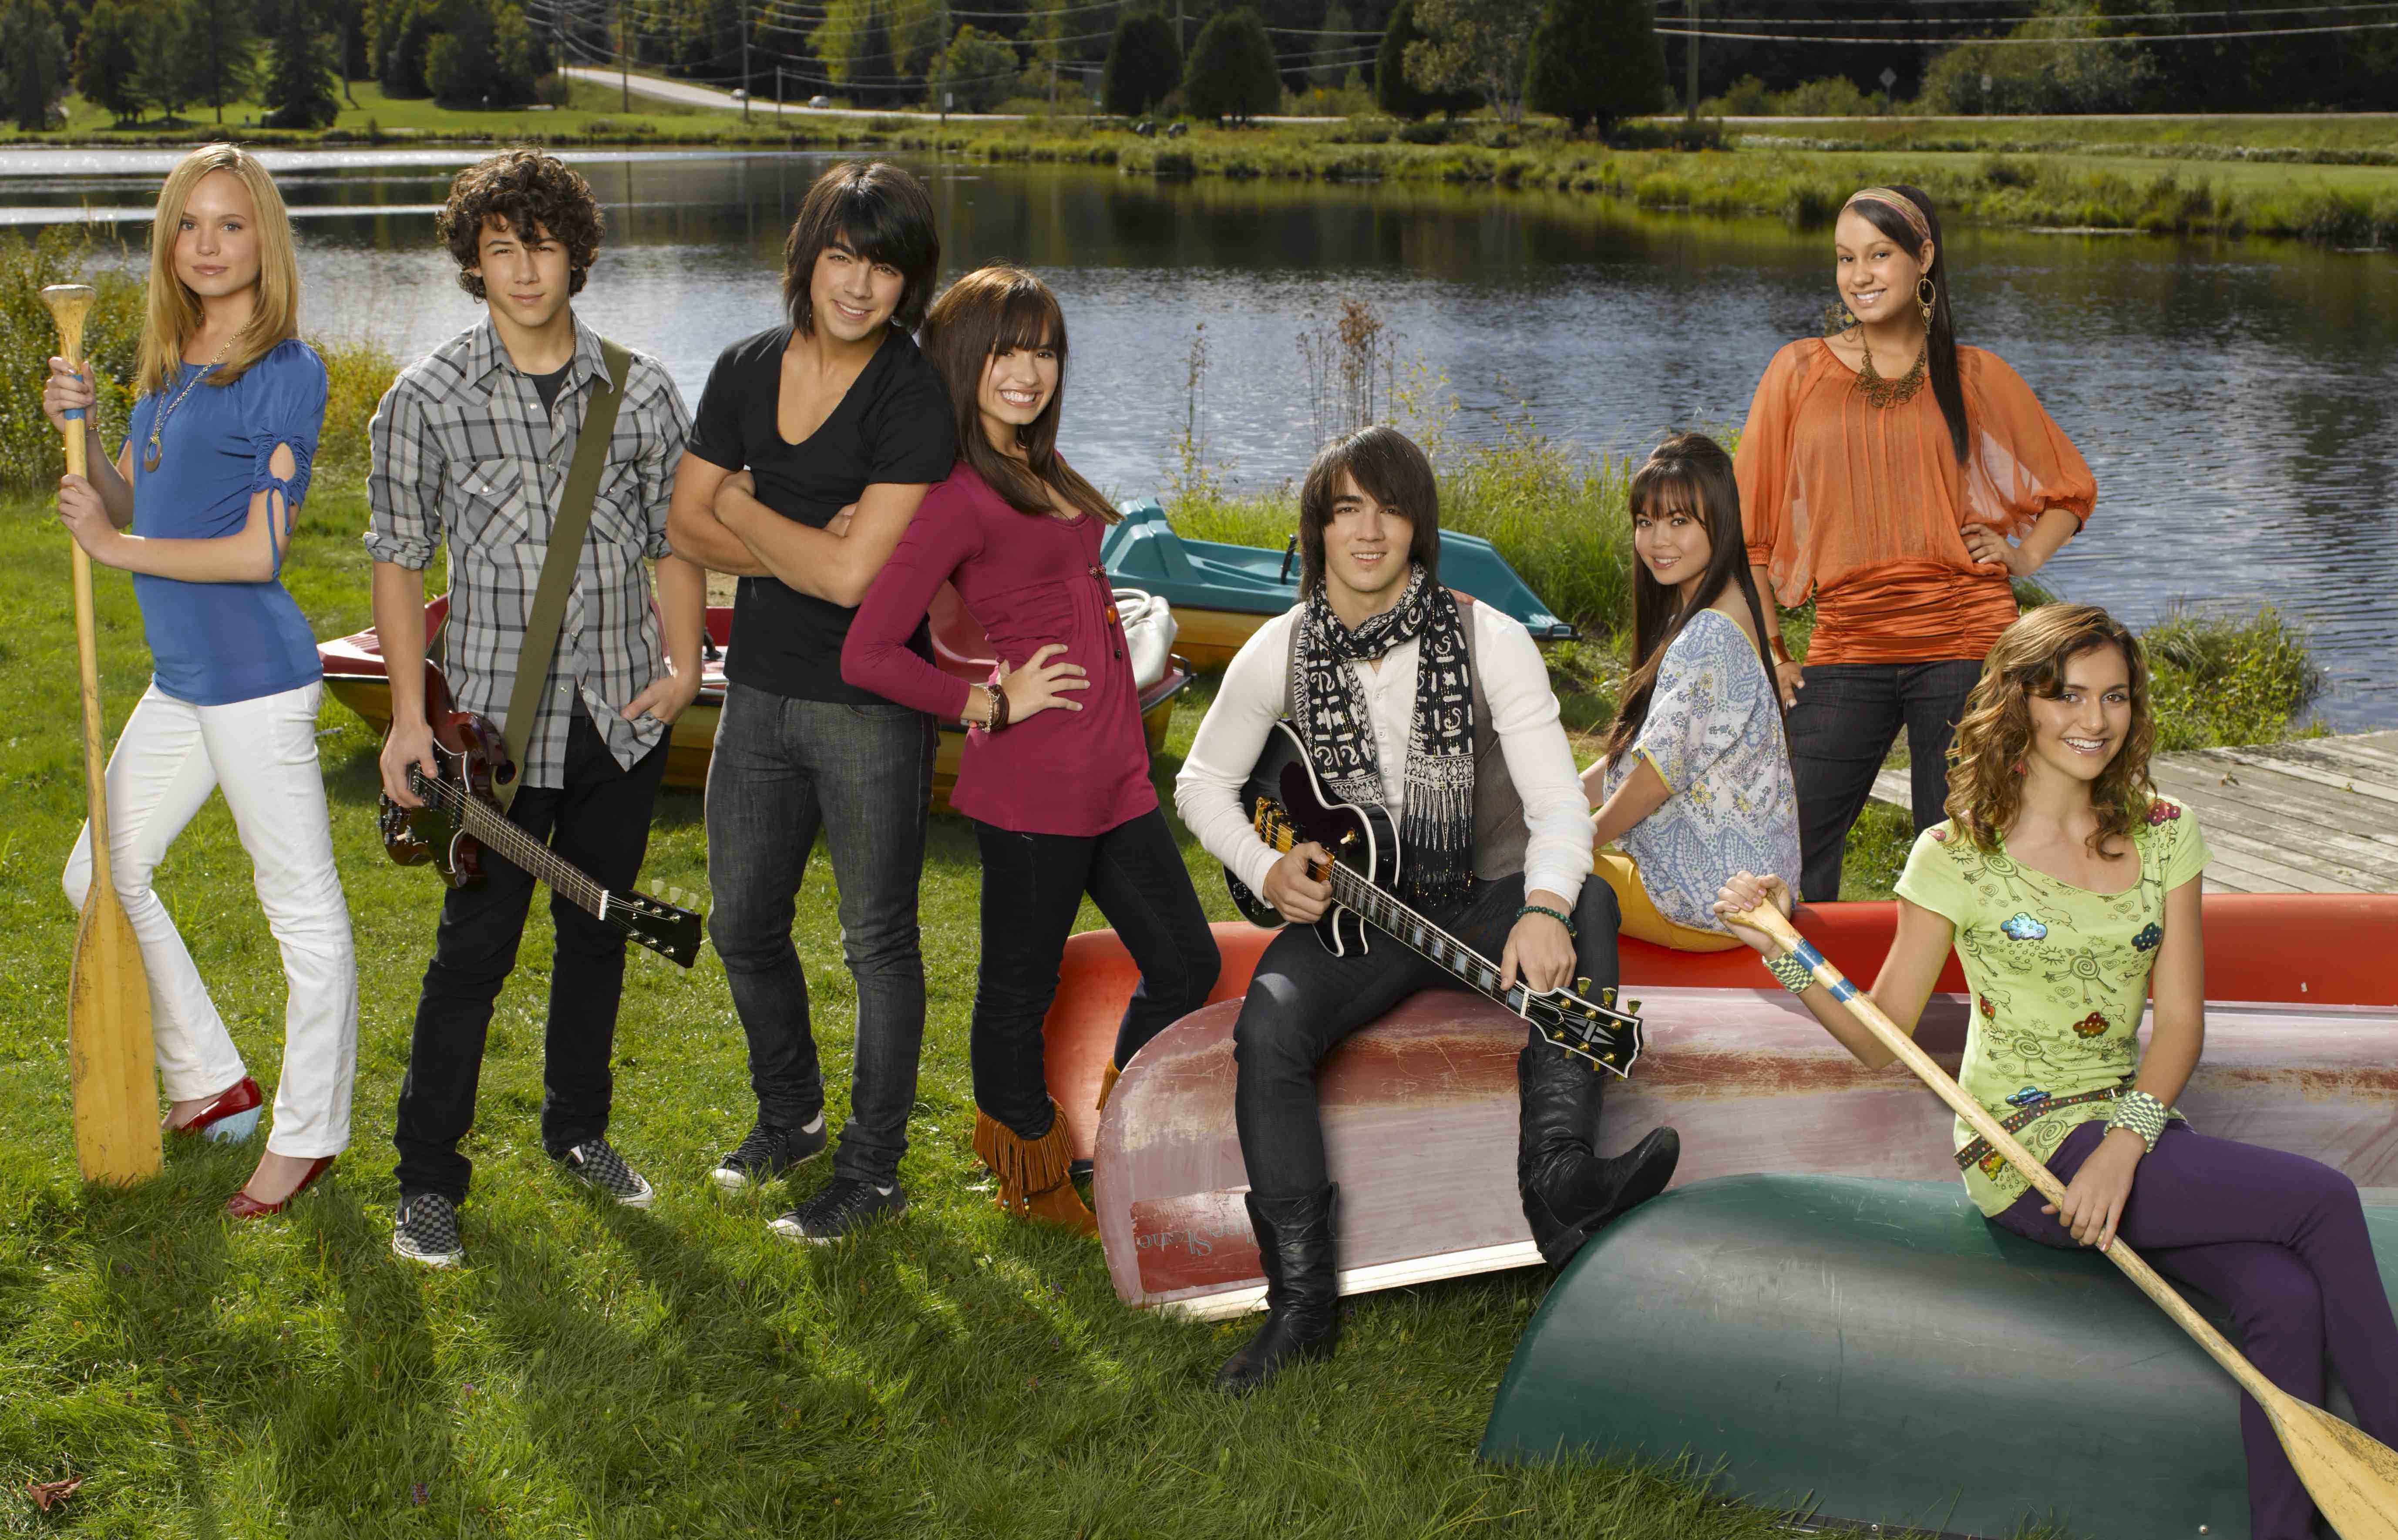 Camp Rock 2 Full Movie Download In Hindi Dubbed